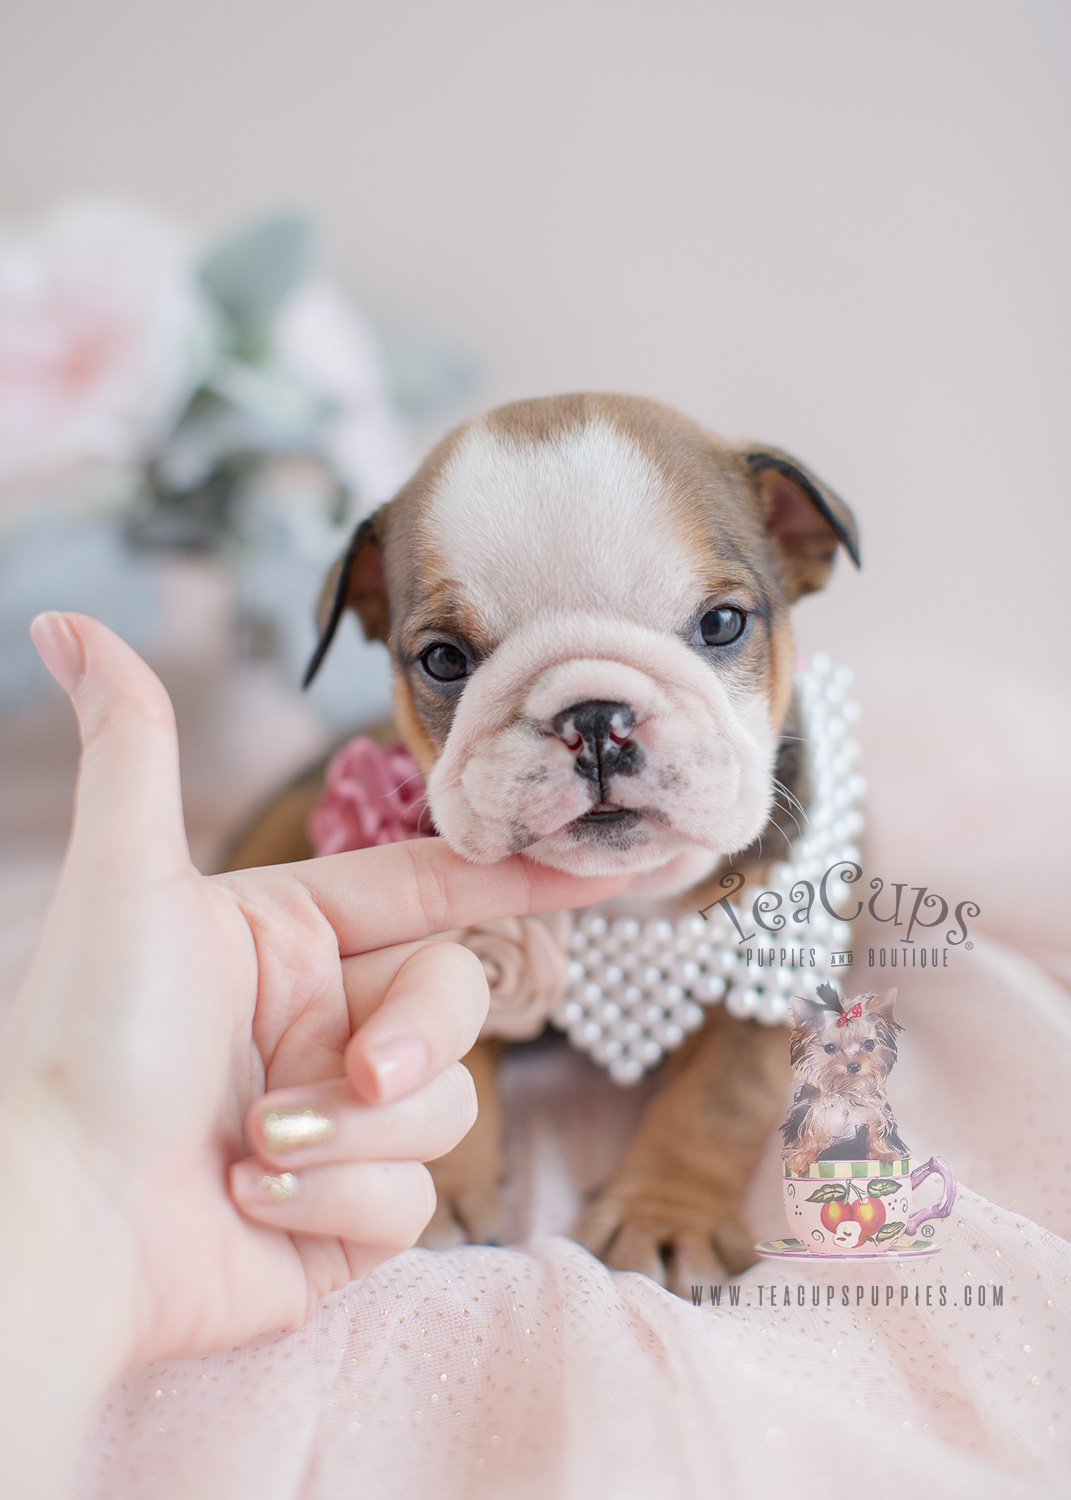 English Bulldog Puppy For Sale at TeaCup Puppies